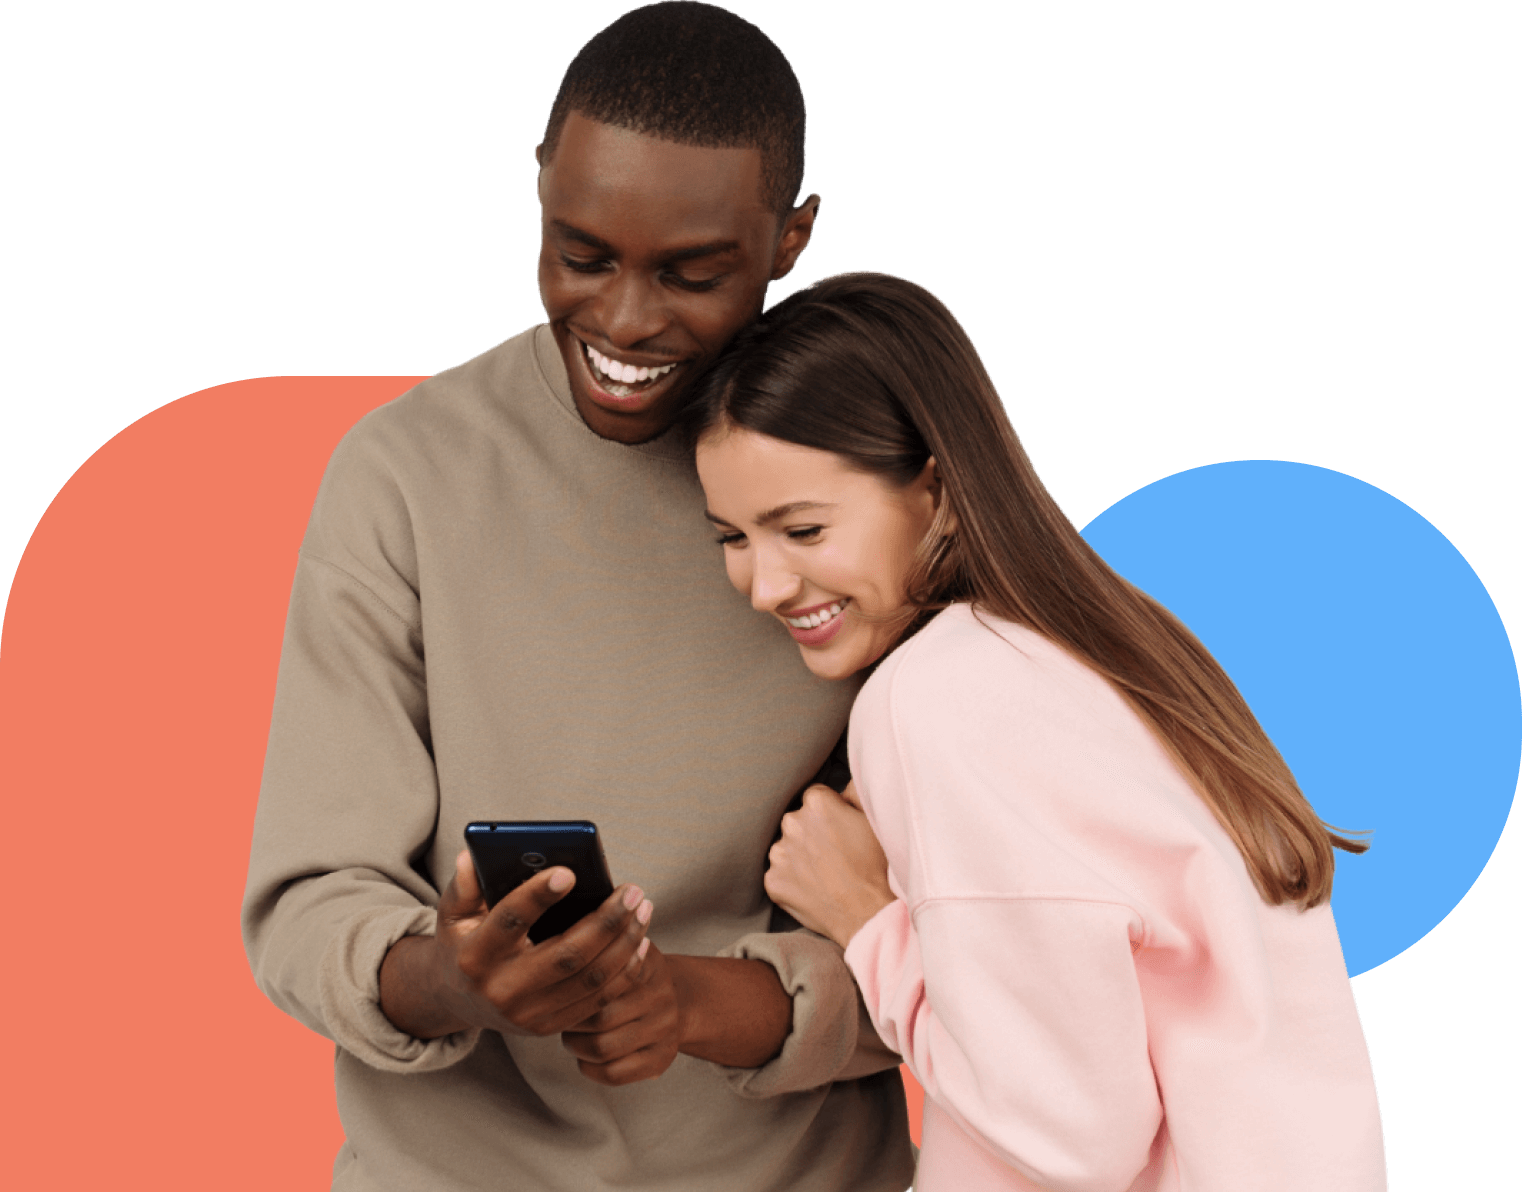 Woman embracing man, both smiling while looking at his mobile phone